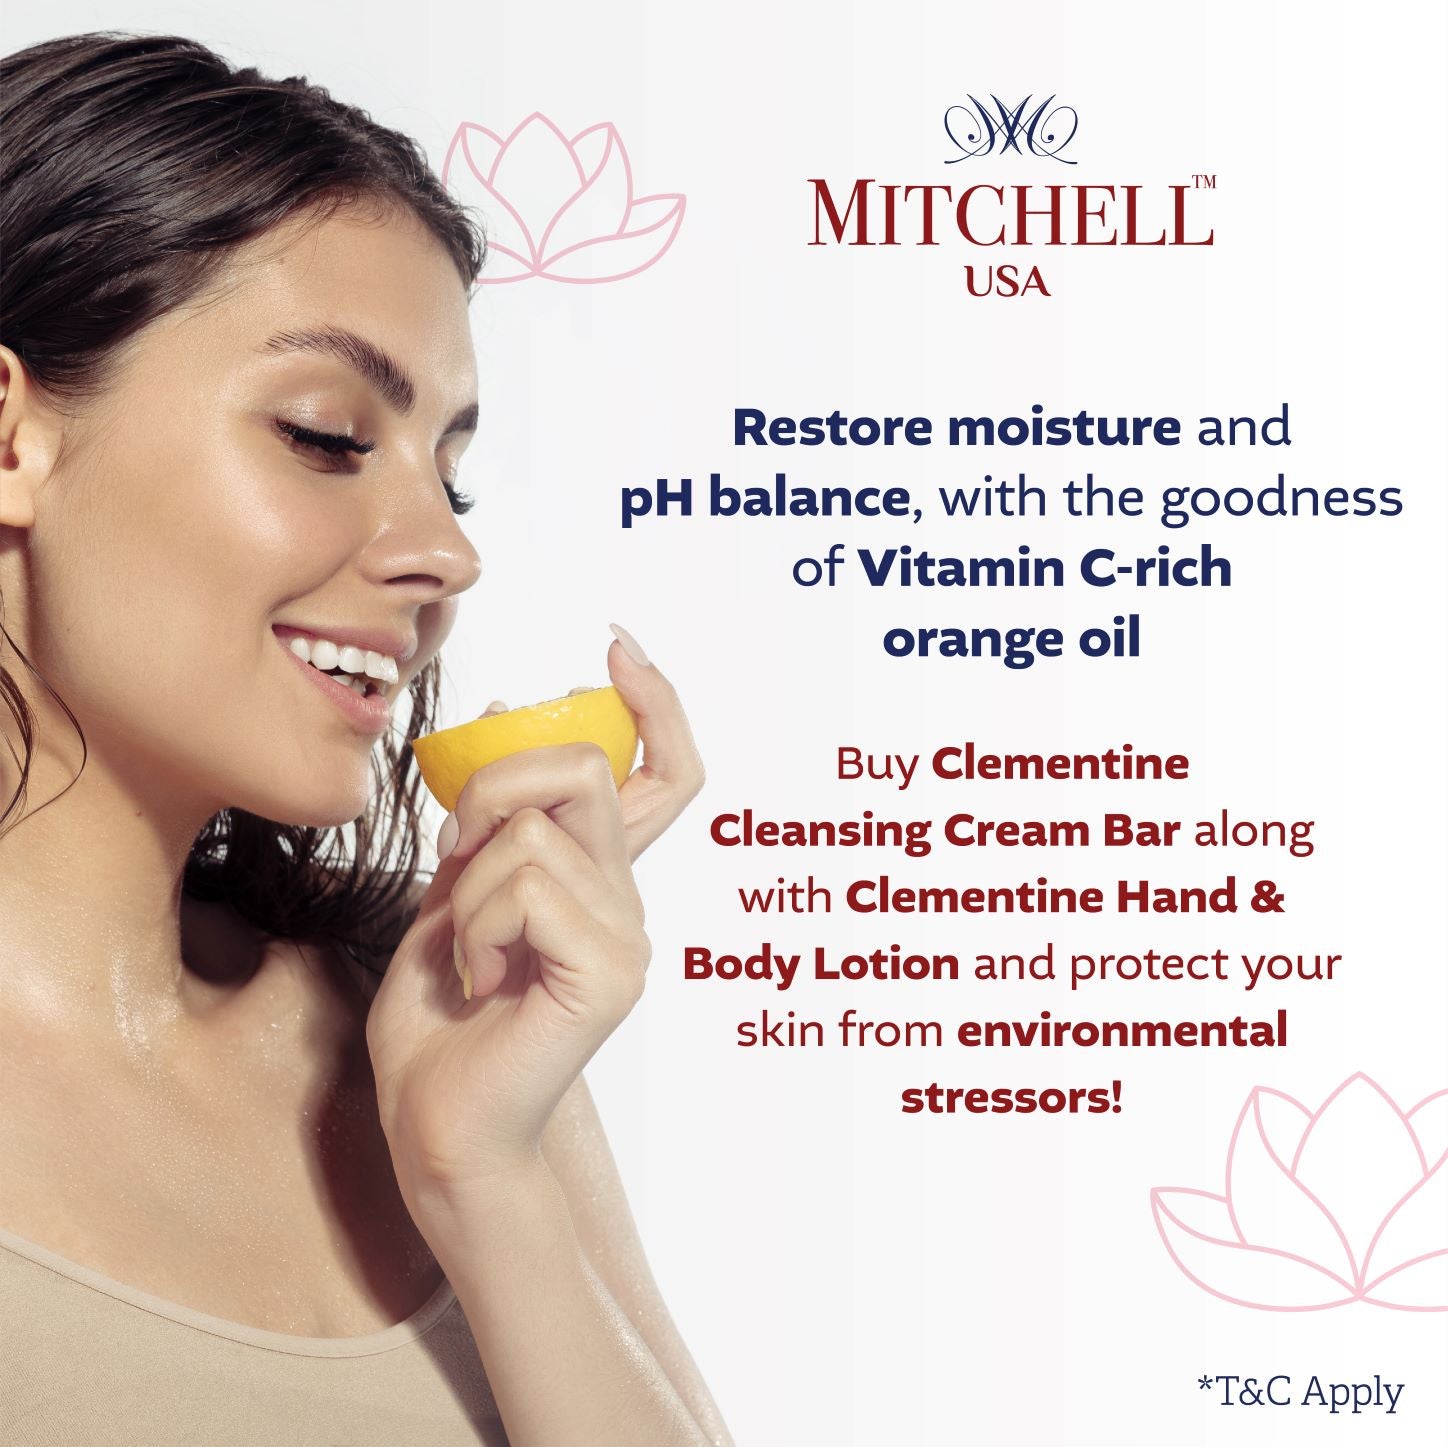 Combo Offer - Clementine Hand &amp; Body Lotion Intense Moisturizing (200ml) + Clementine Cleansing Cream Bar (125gm) With Pure Orange Oil